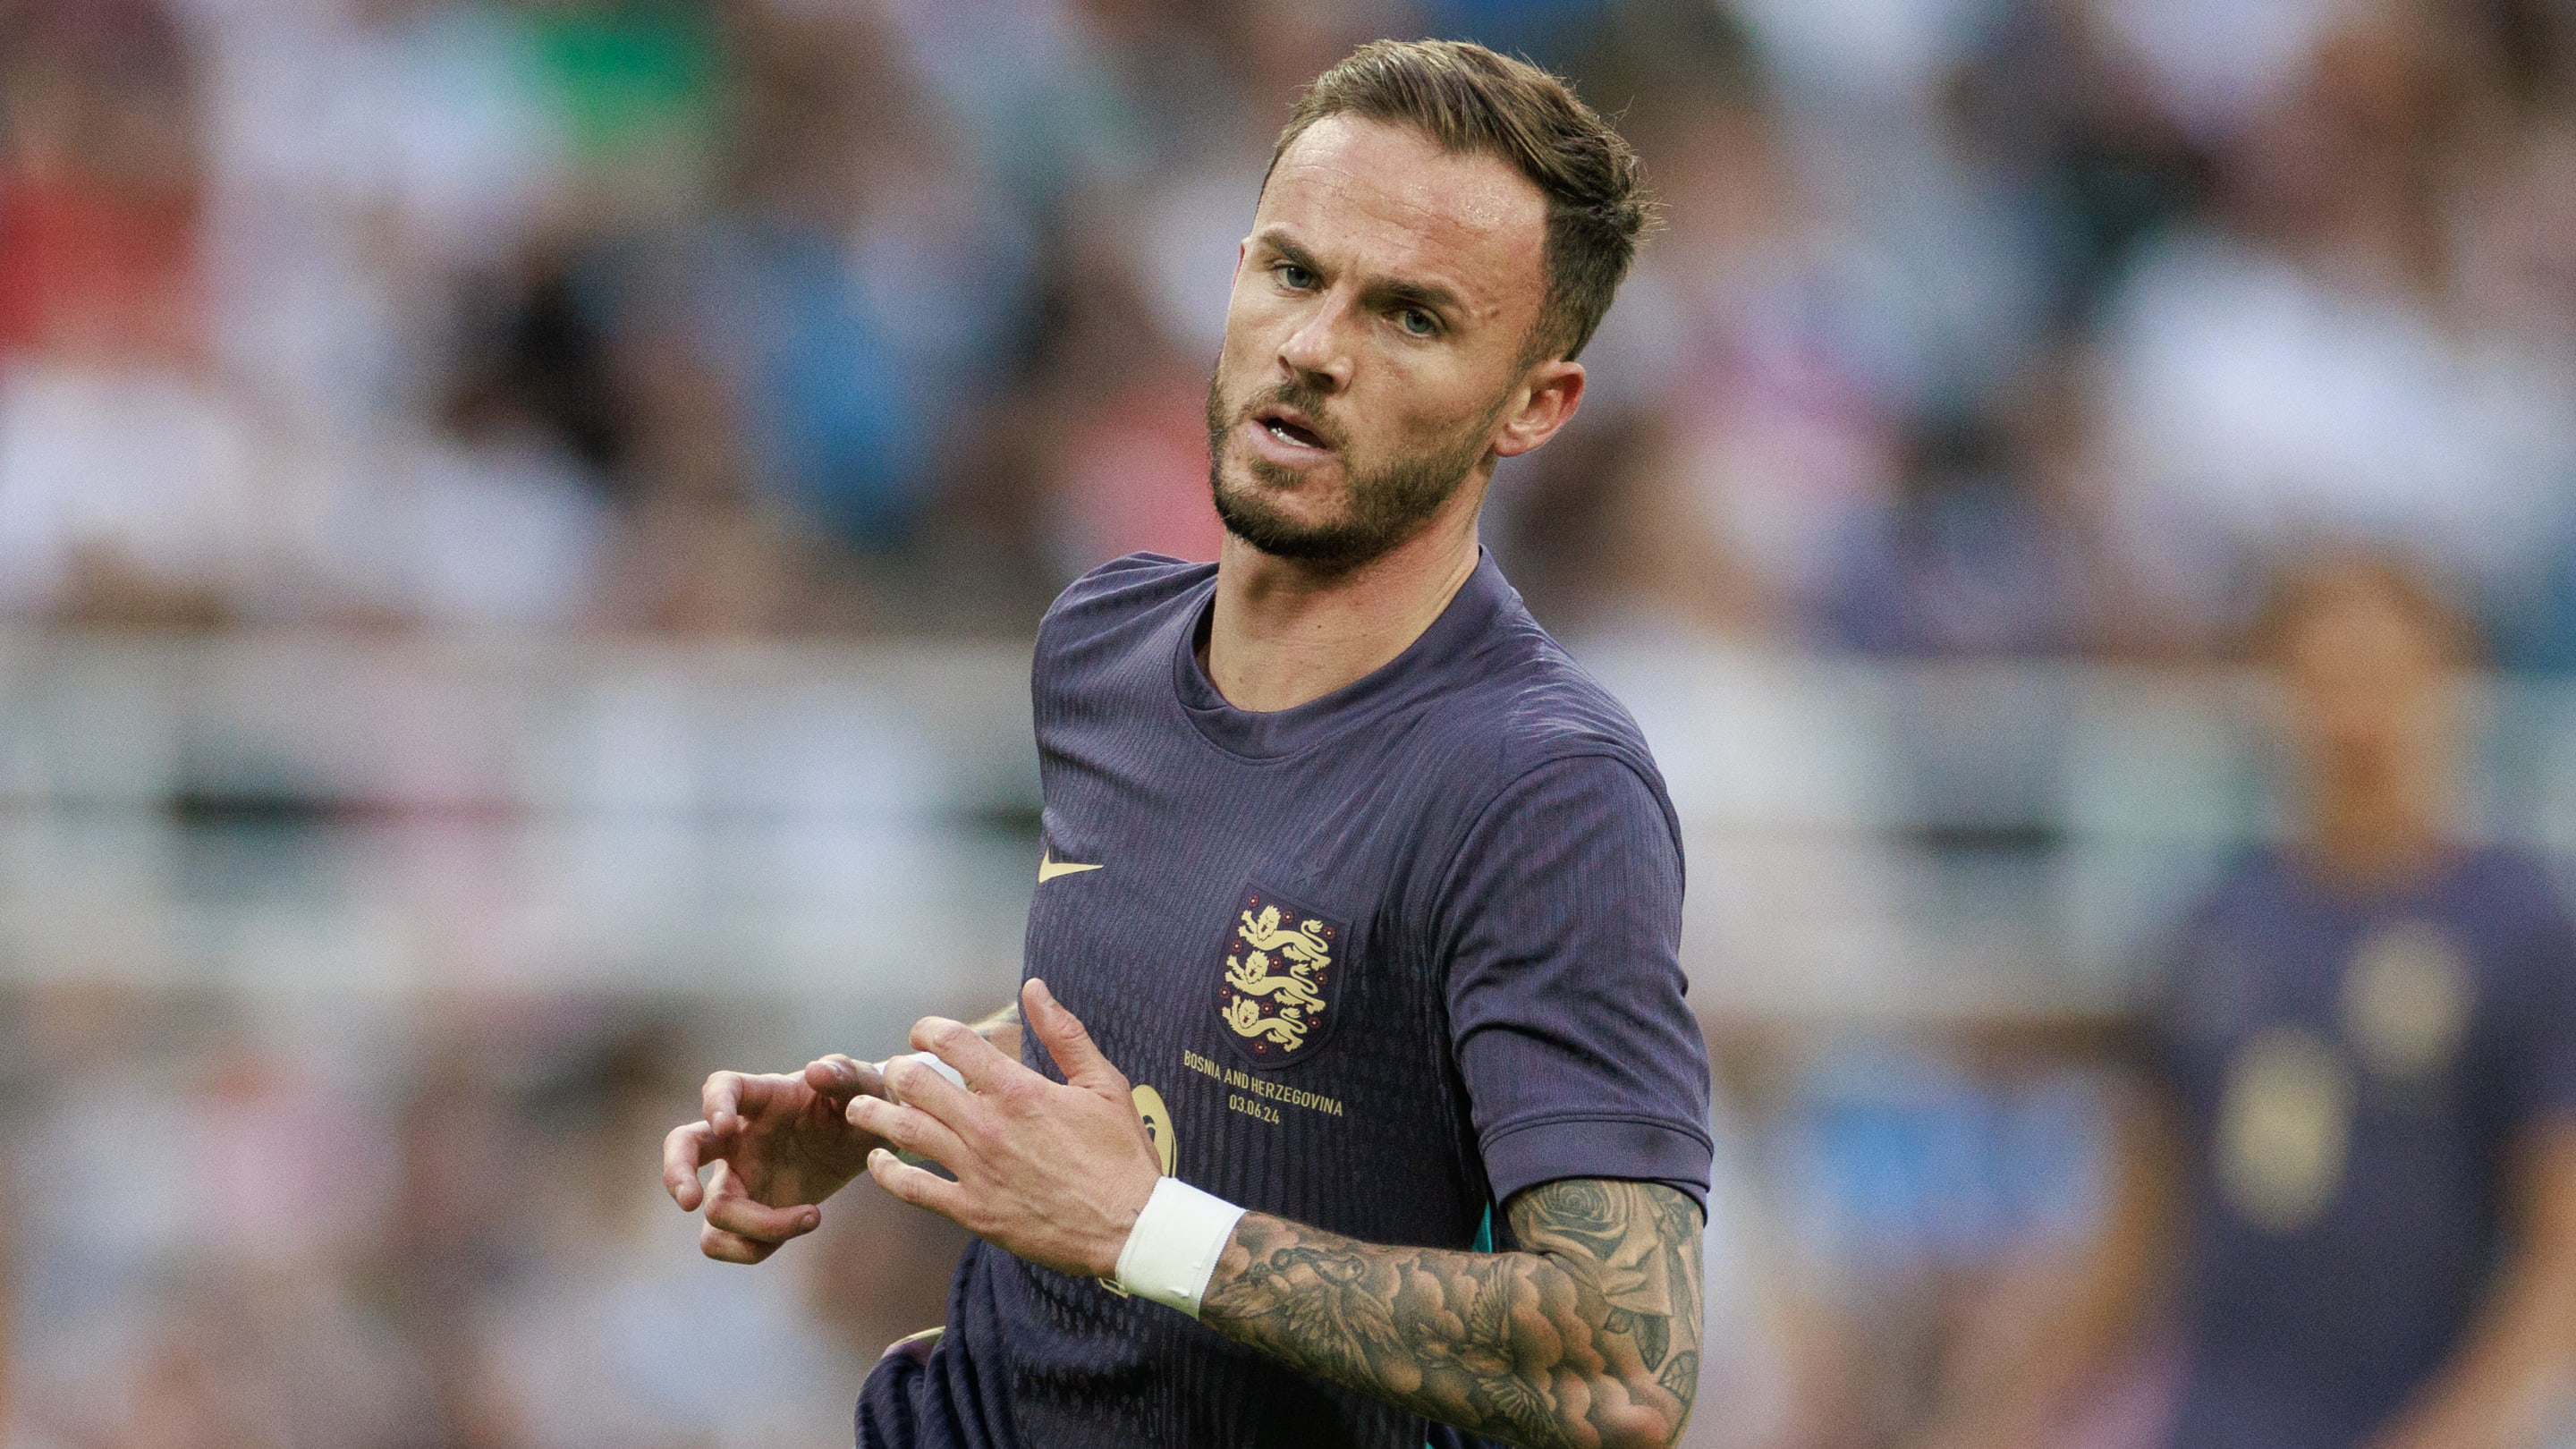 'Devastated' James Maddison reacts to losing place in England squad